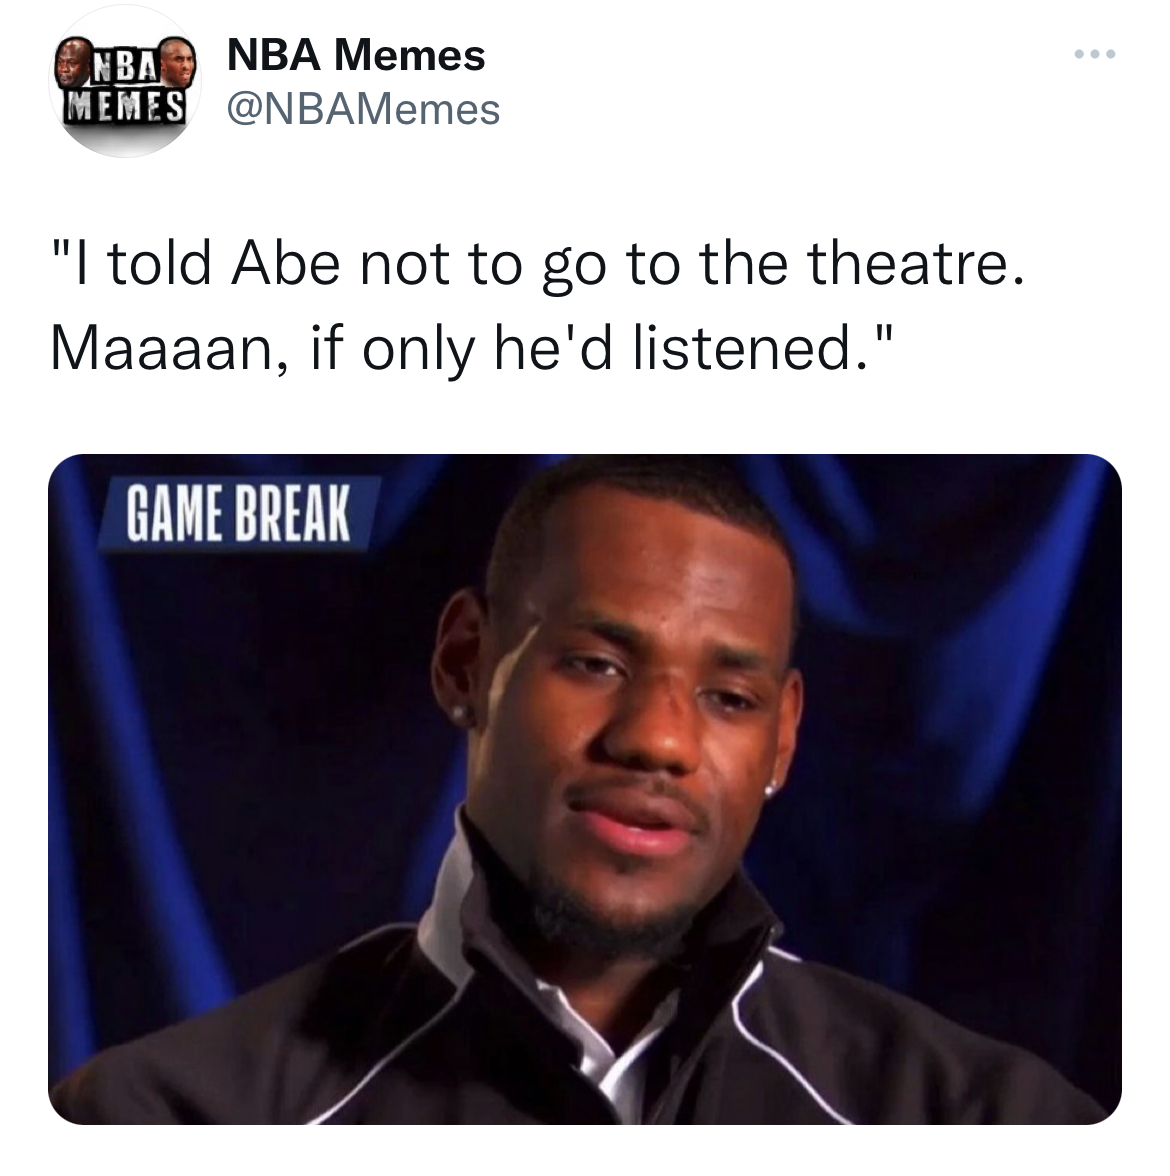 LeBron James - Nba Nba Memes Memes "I told Abe not to go to the theatre. Maaaan, if only he'd listened." Game Break